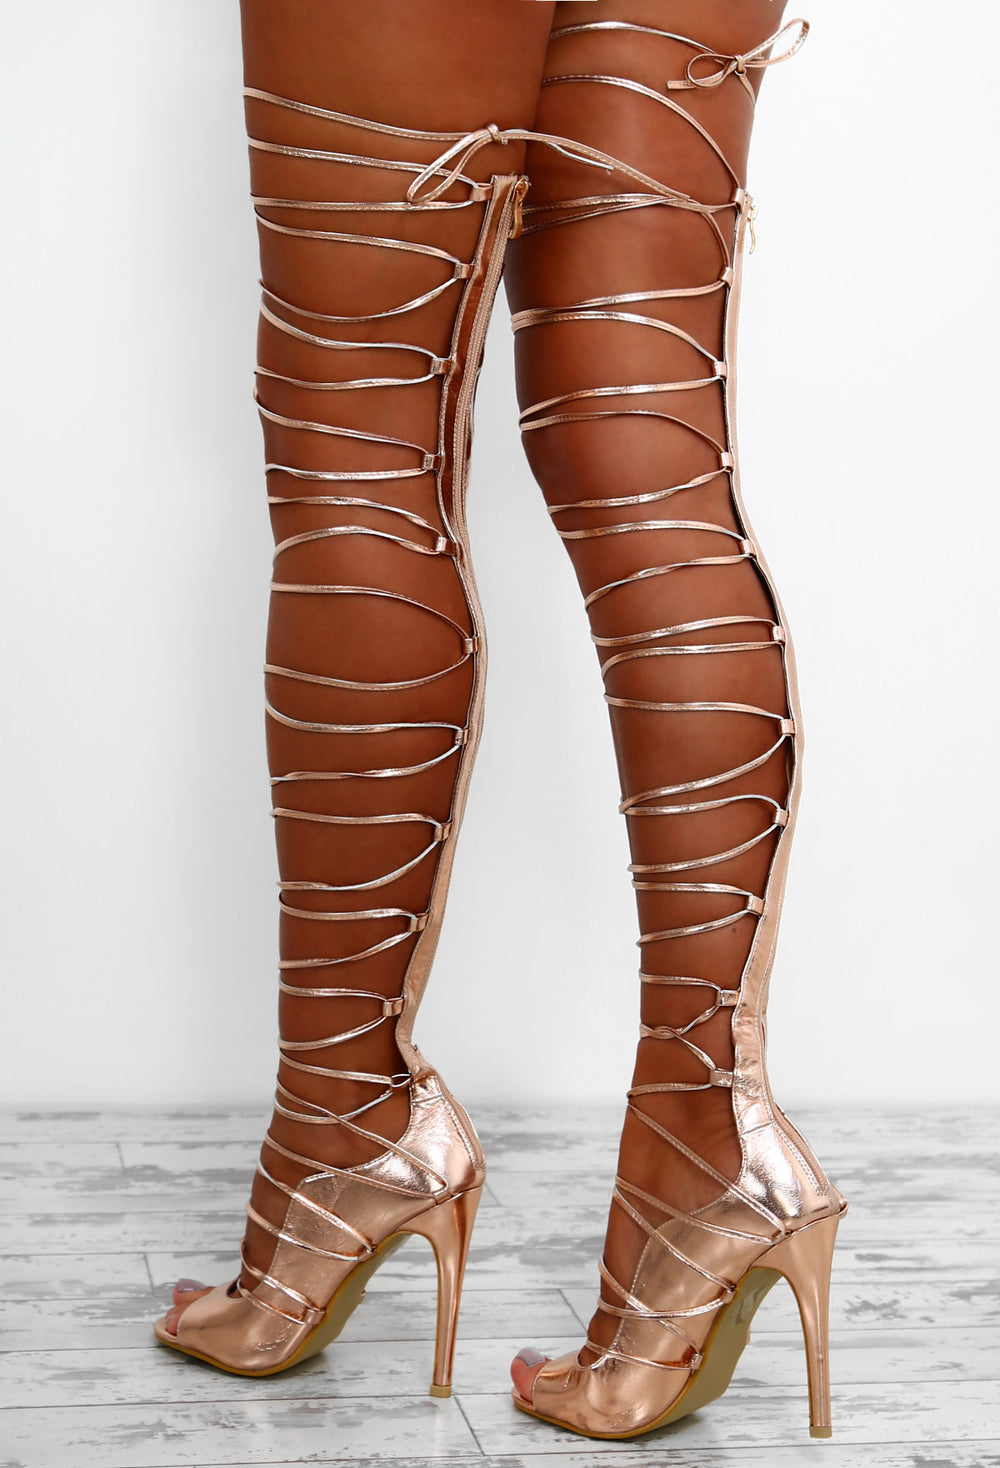 thigh lace up heels